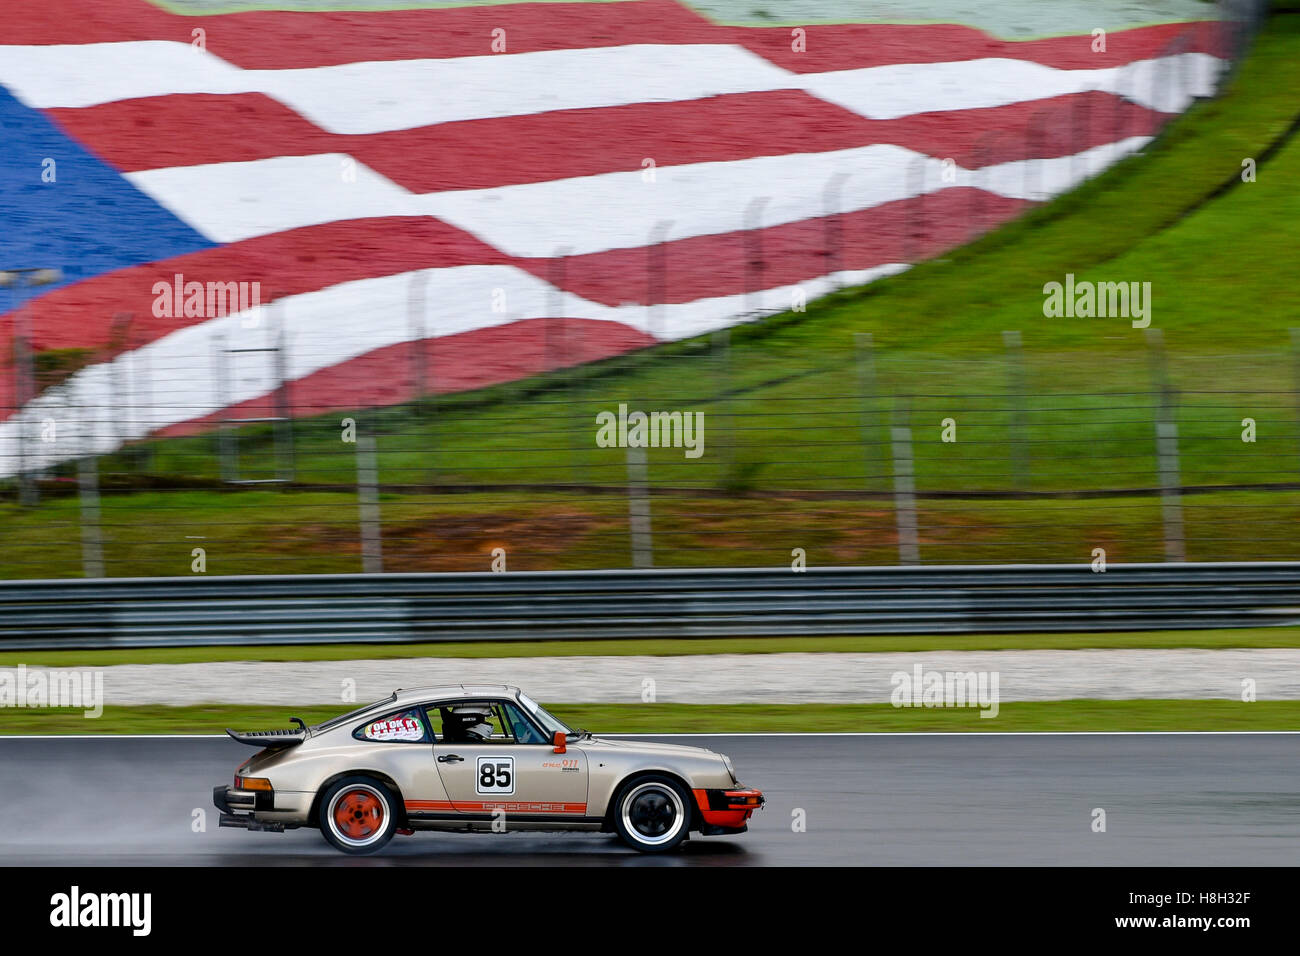 Peter Cardosa driving the (85) Porsche 911 Carrera on track during the Asia Classic Car Challenge at Sepang Circuit on November 12, 2016 in Kuala Lumpur, Malaysia. Stock Photo